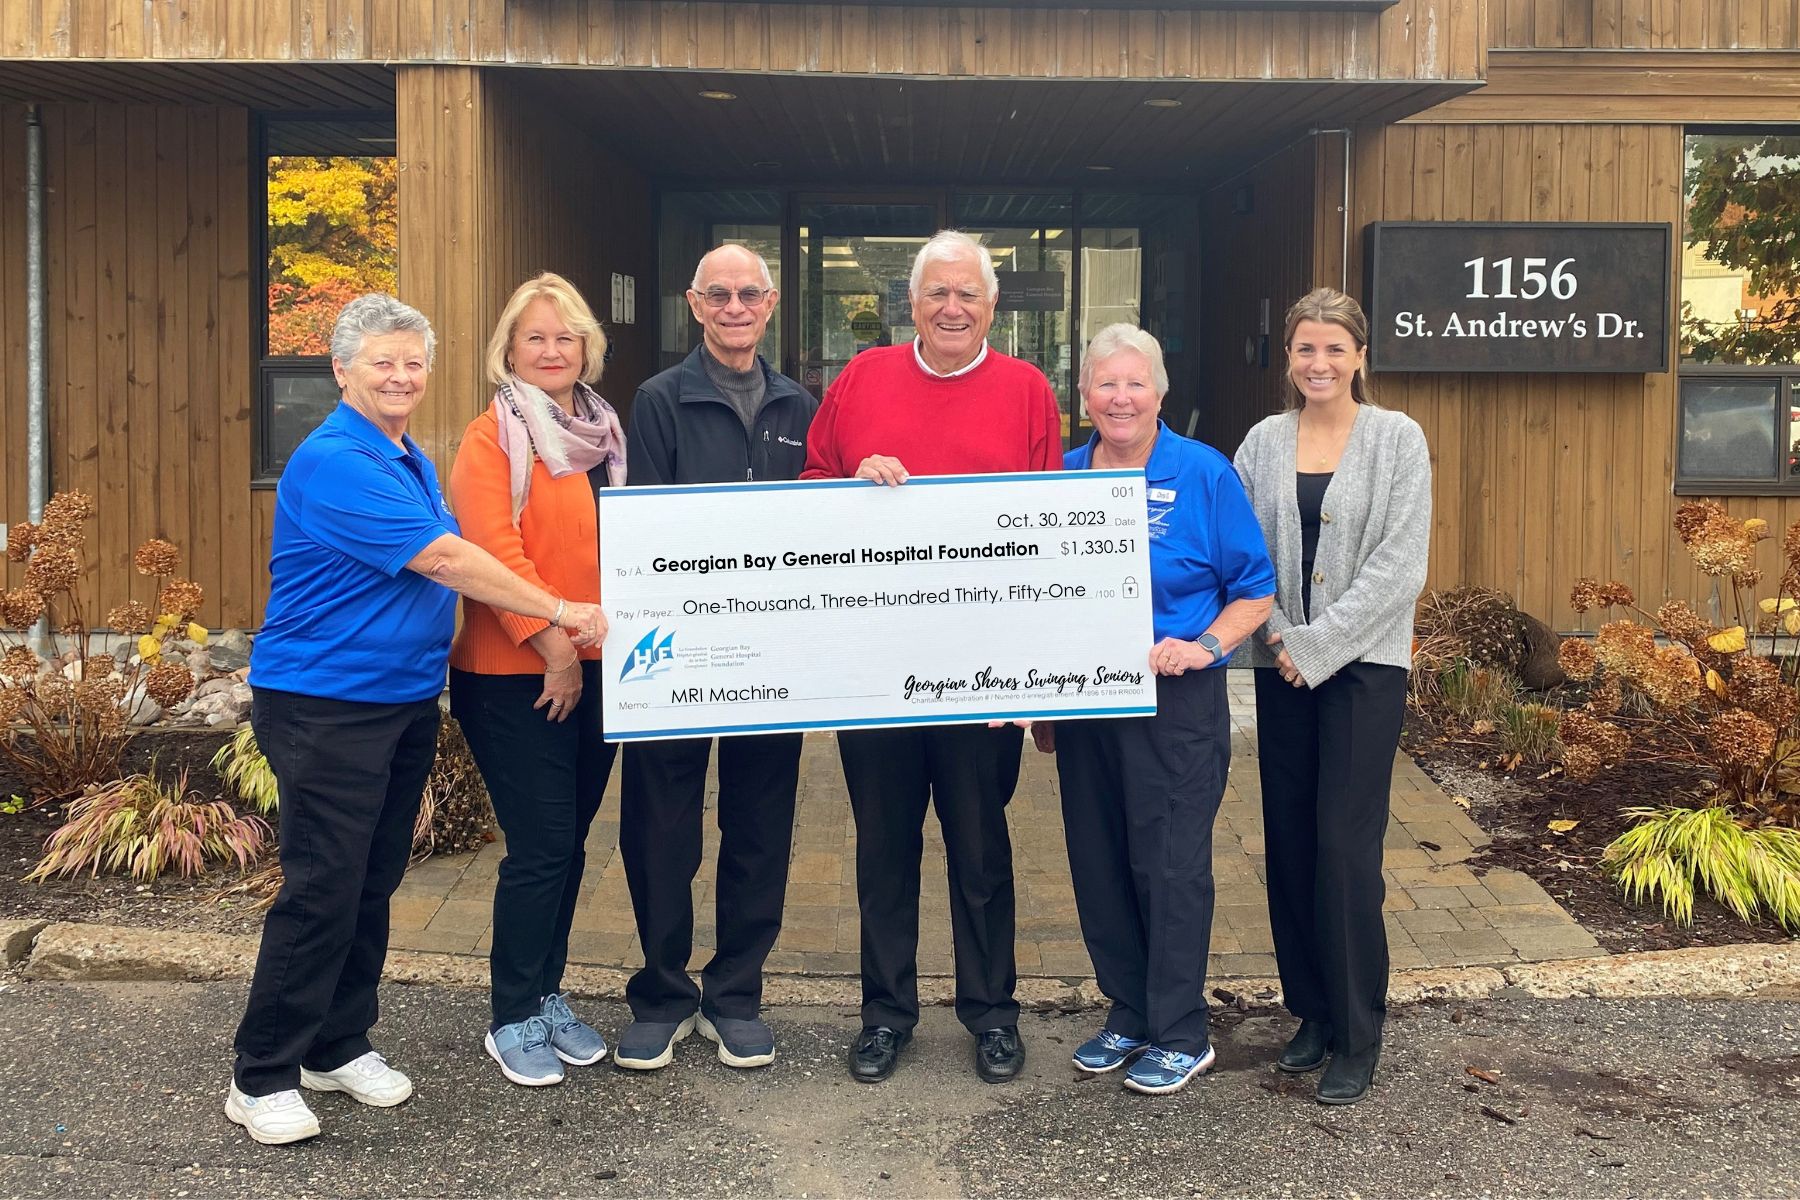 Four women and two men hold a giant cheque made out to GBGH Foundation for $1, 330.51 from Georgian Shores Swinging Seniors